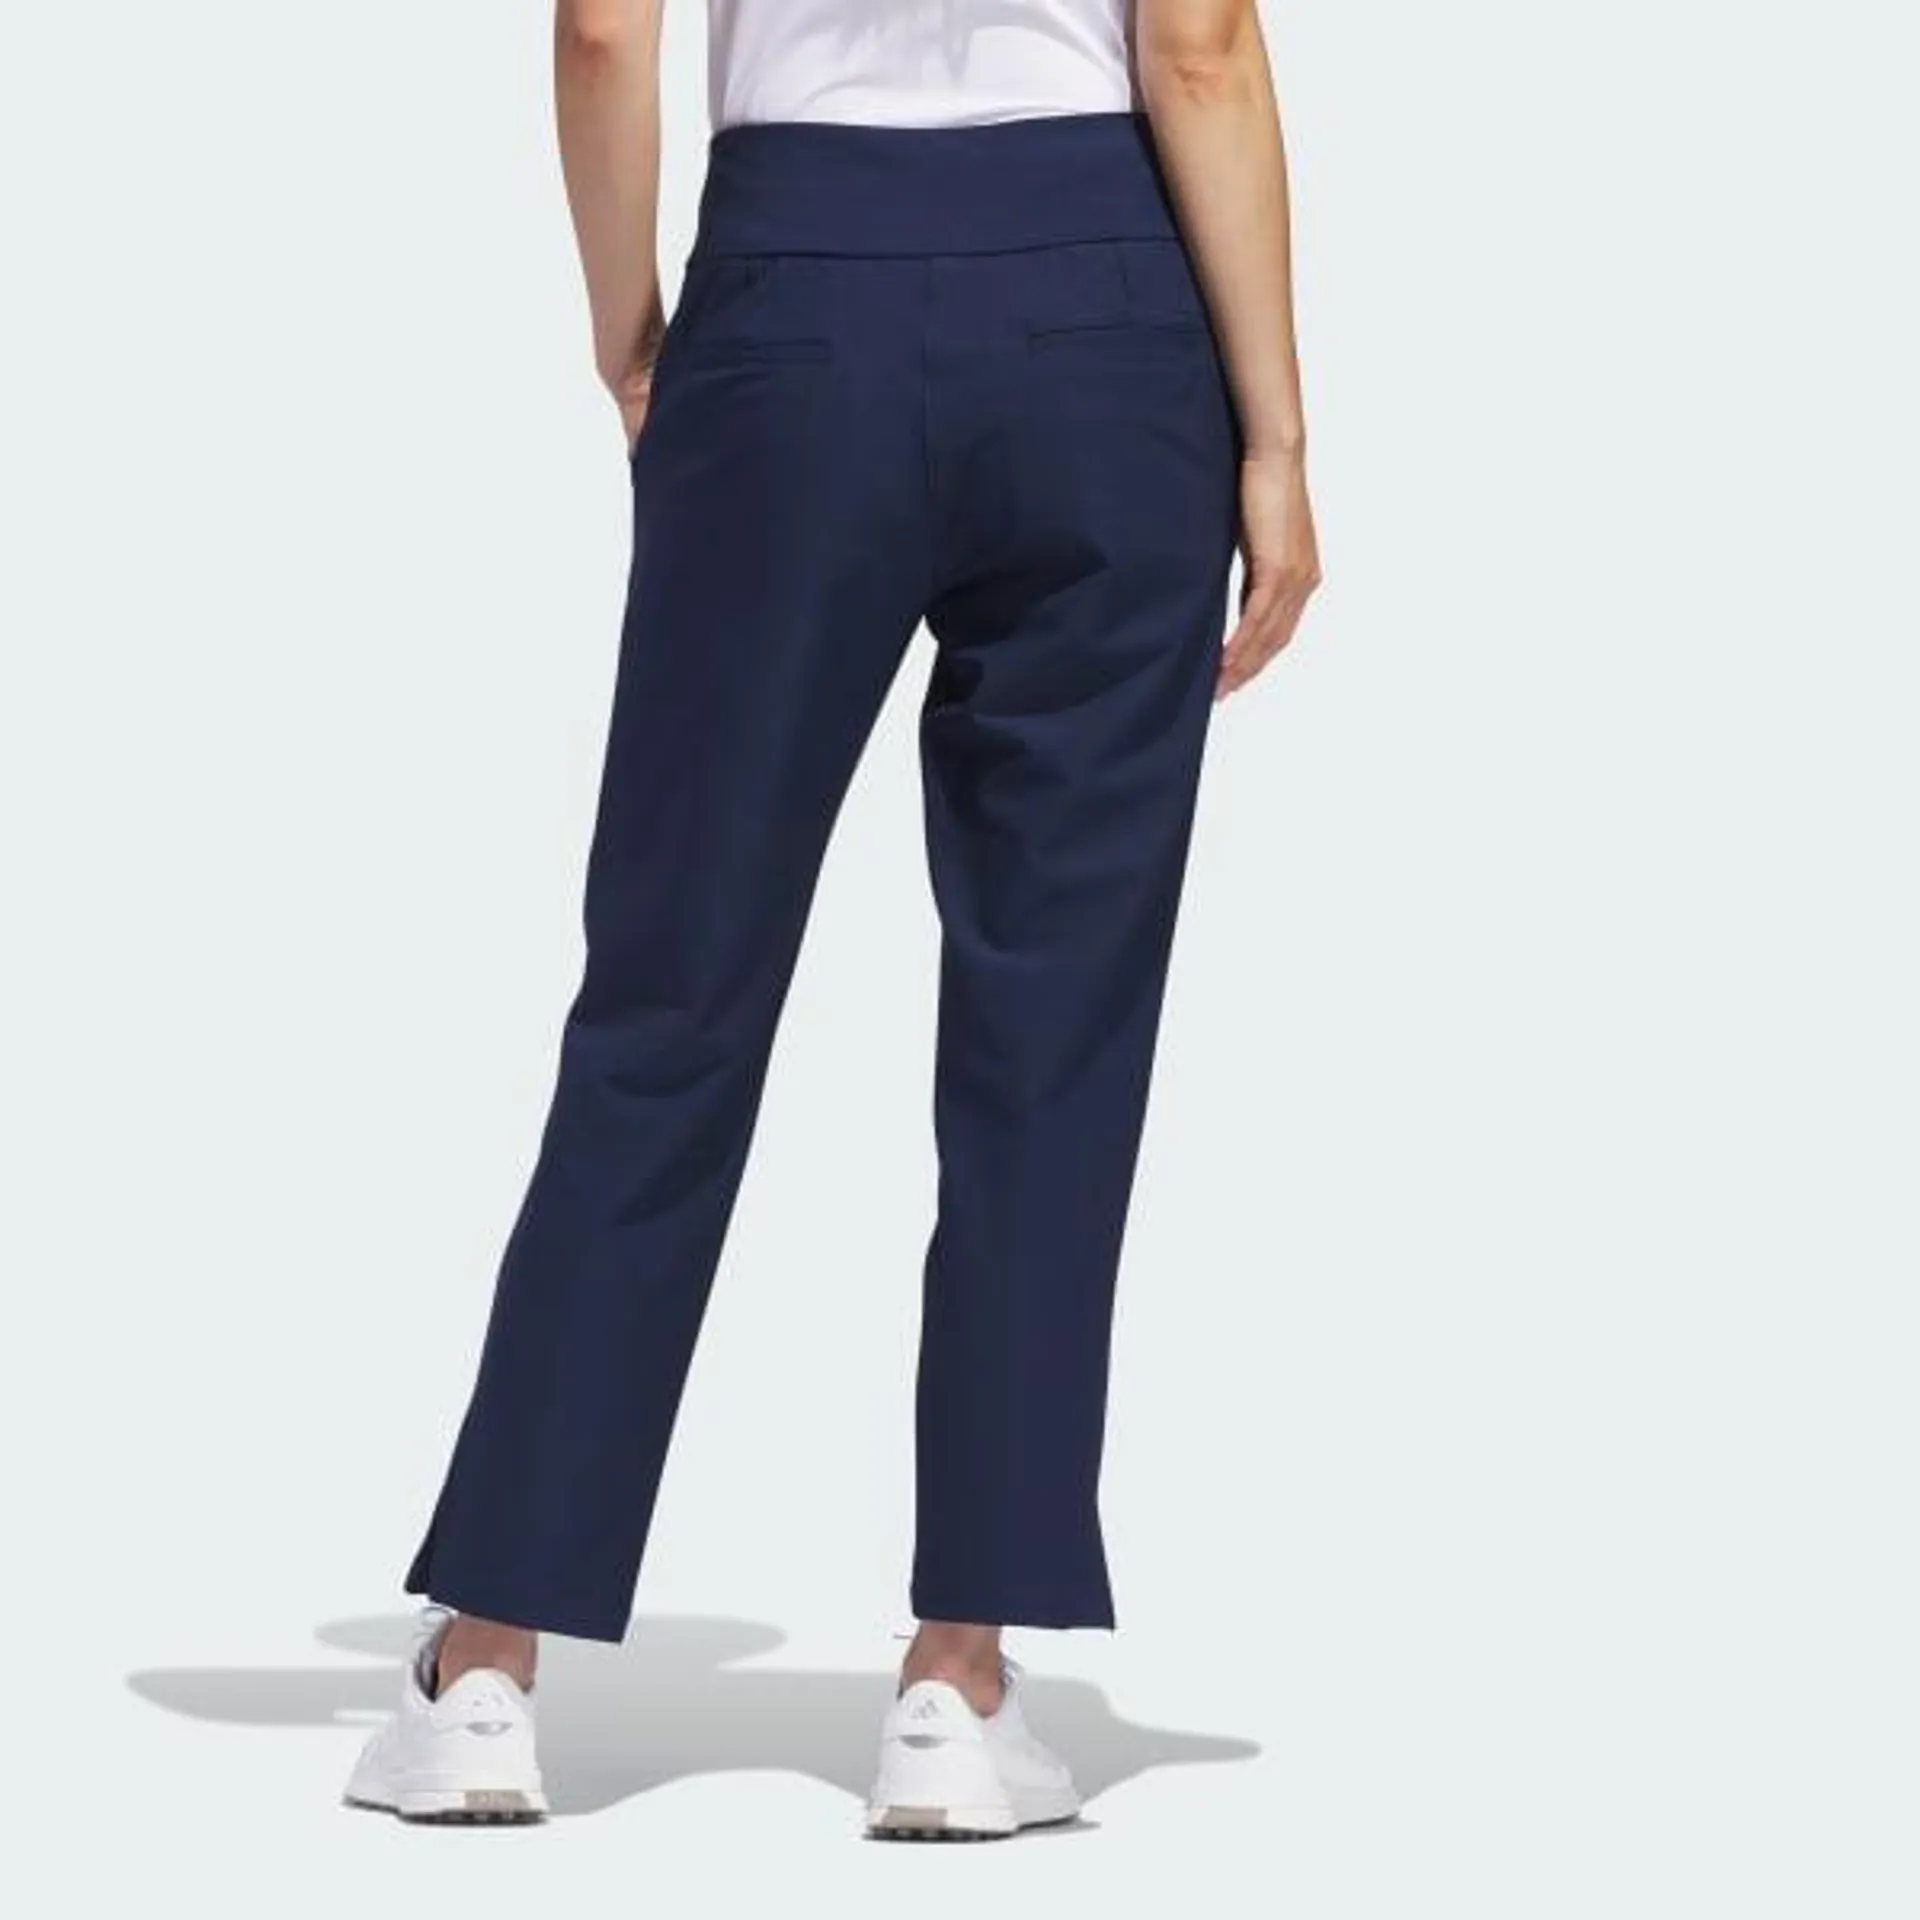 Ultimate365 Solid Ankle Pants